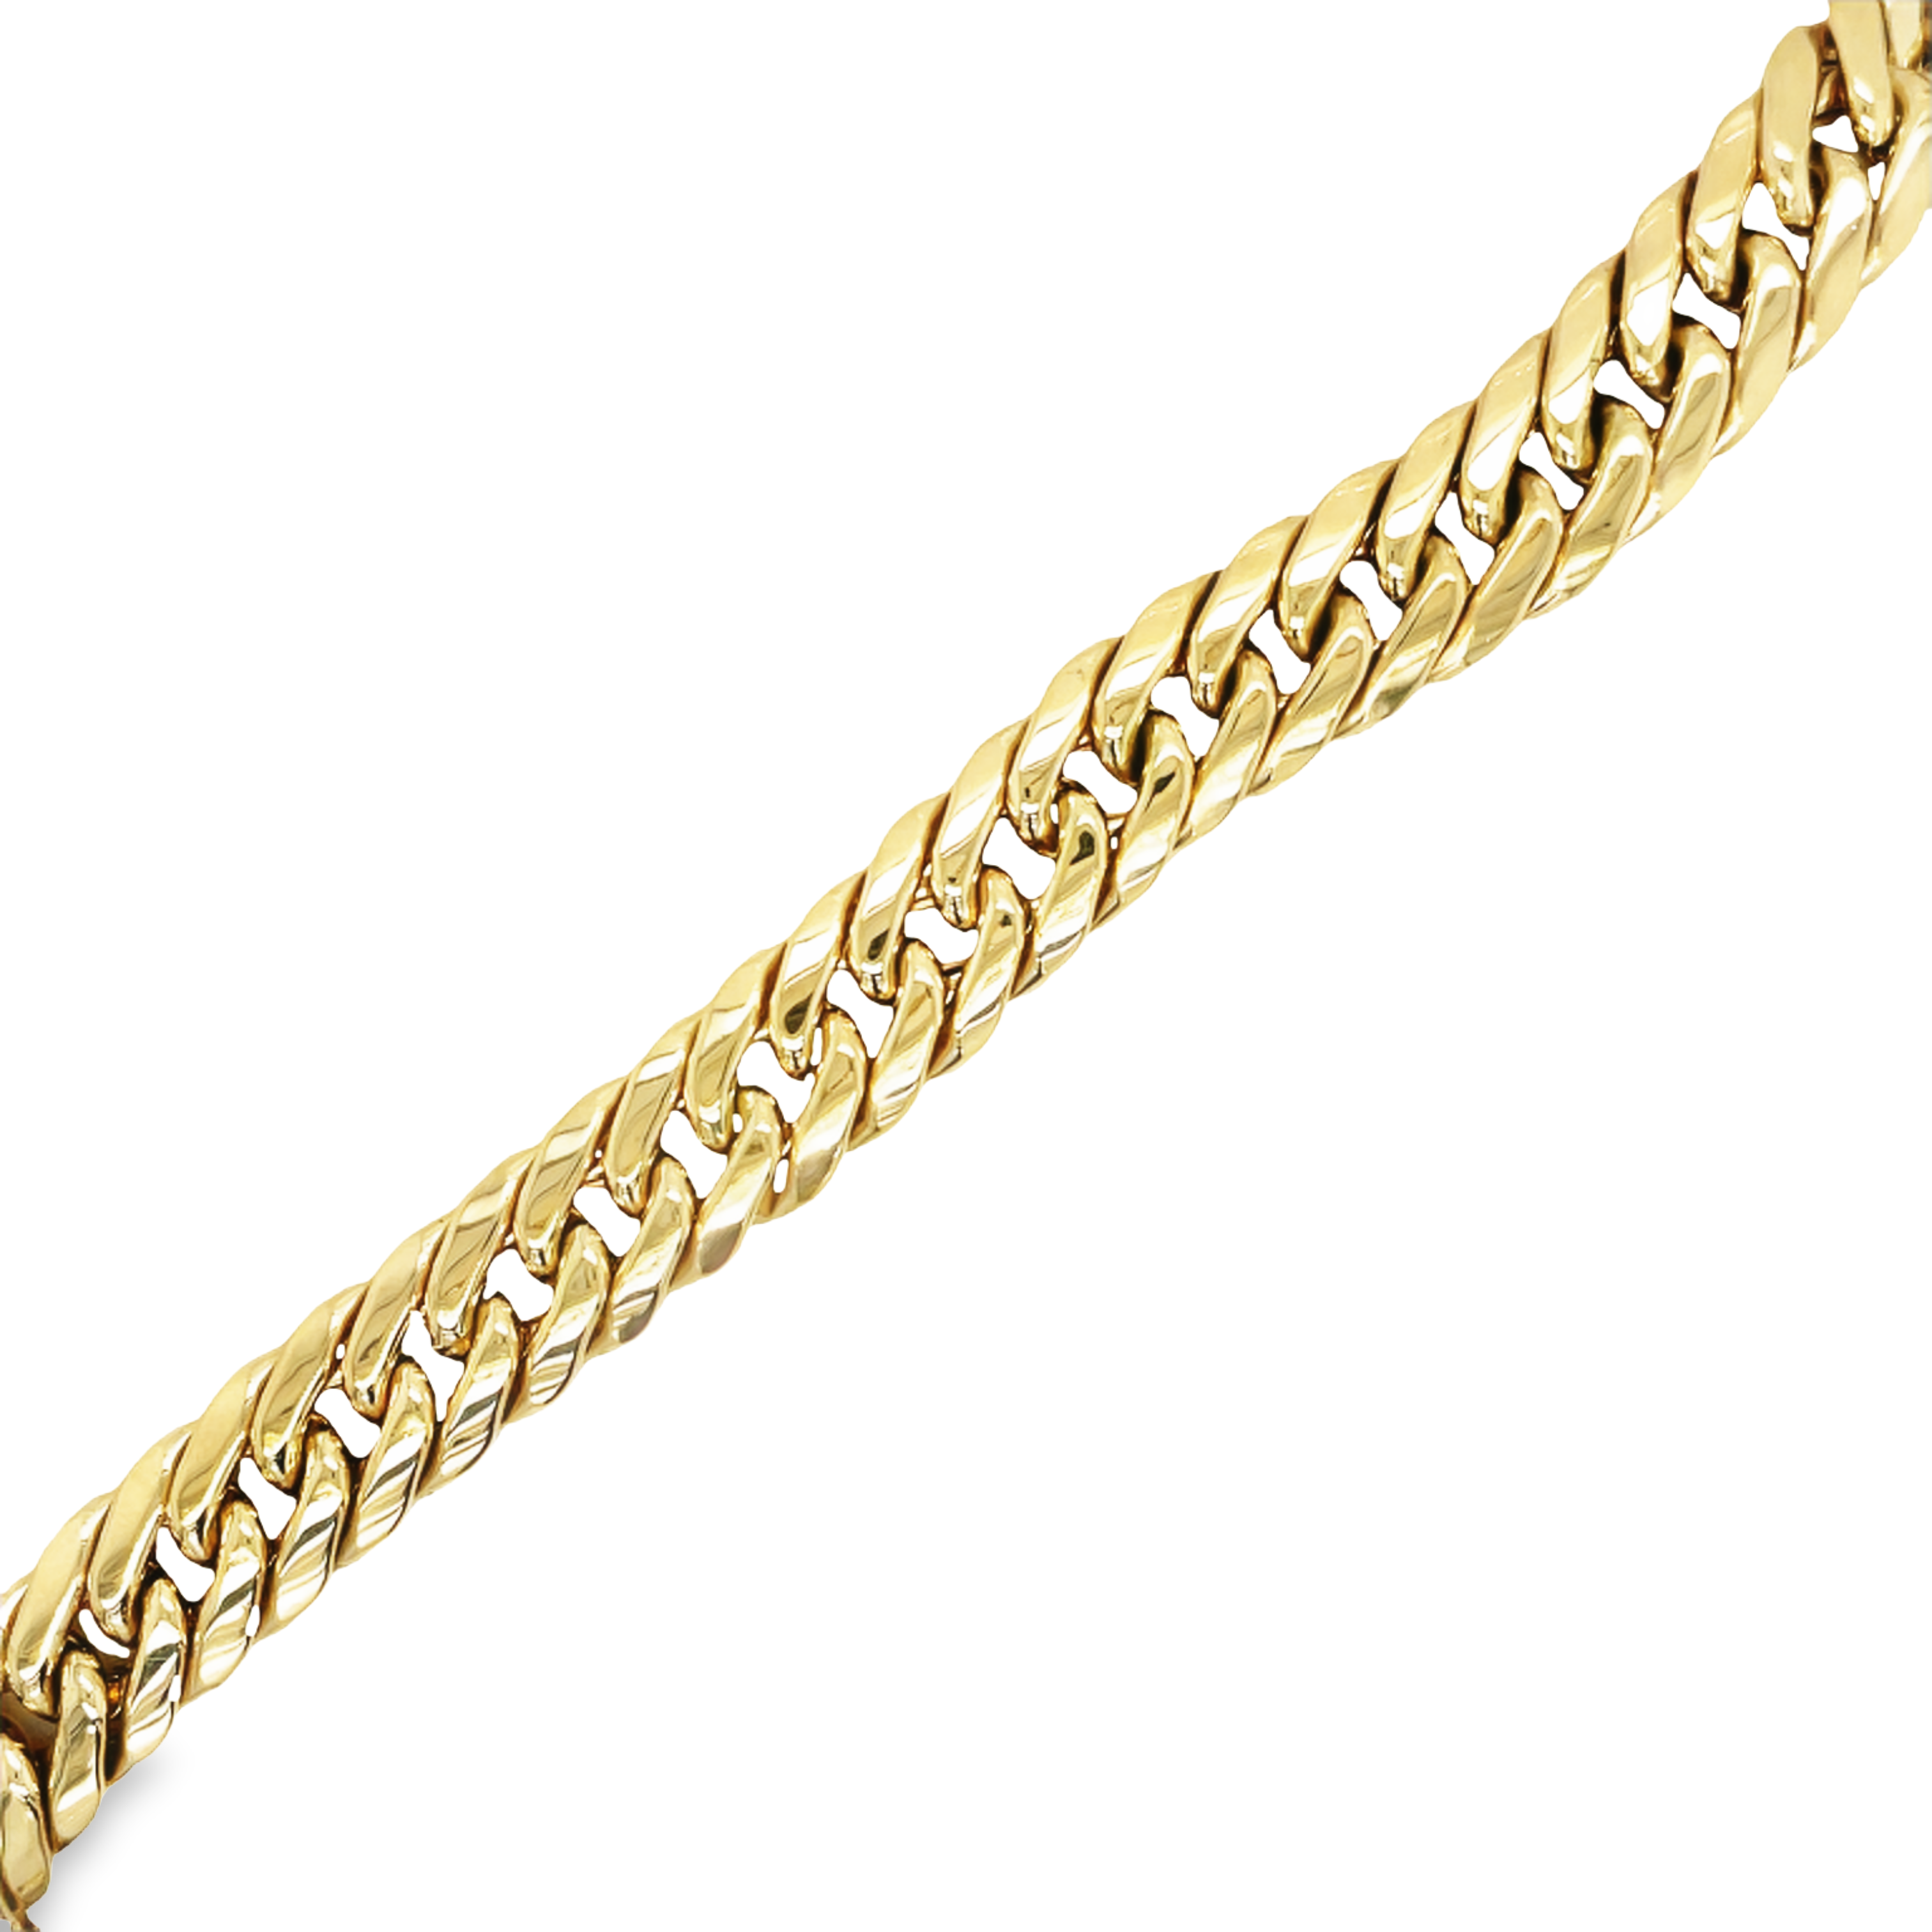 This 14k Flat Curb Link Necklace is the perfect addition to your jewelry collection. Crafted with high-quality 14k yellow gold, it has a flat curb design that is 14mm wide with a hidden clasp. It is finished with a stunning high polish. Wear it alone or layer it with other necklaces for a unique look.